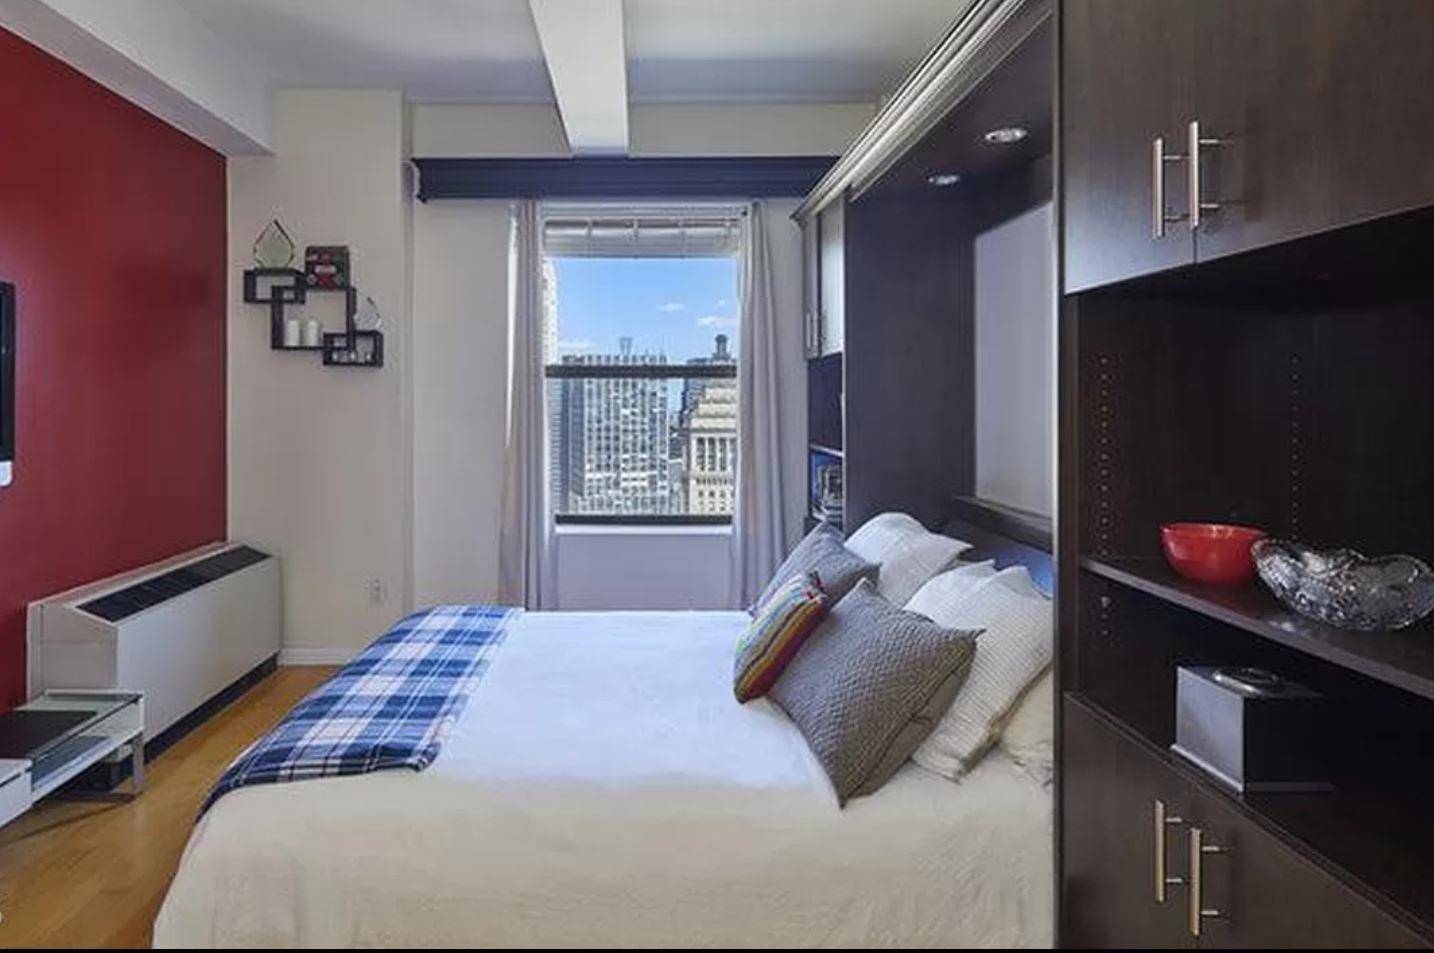 Live high in the sky with river and expansive city views in this light, bright furnished studio on the 41st floor of the Downtown Club.